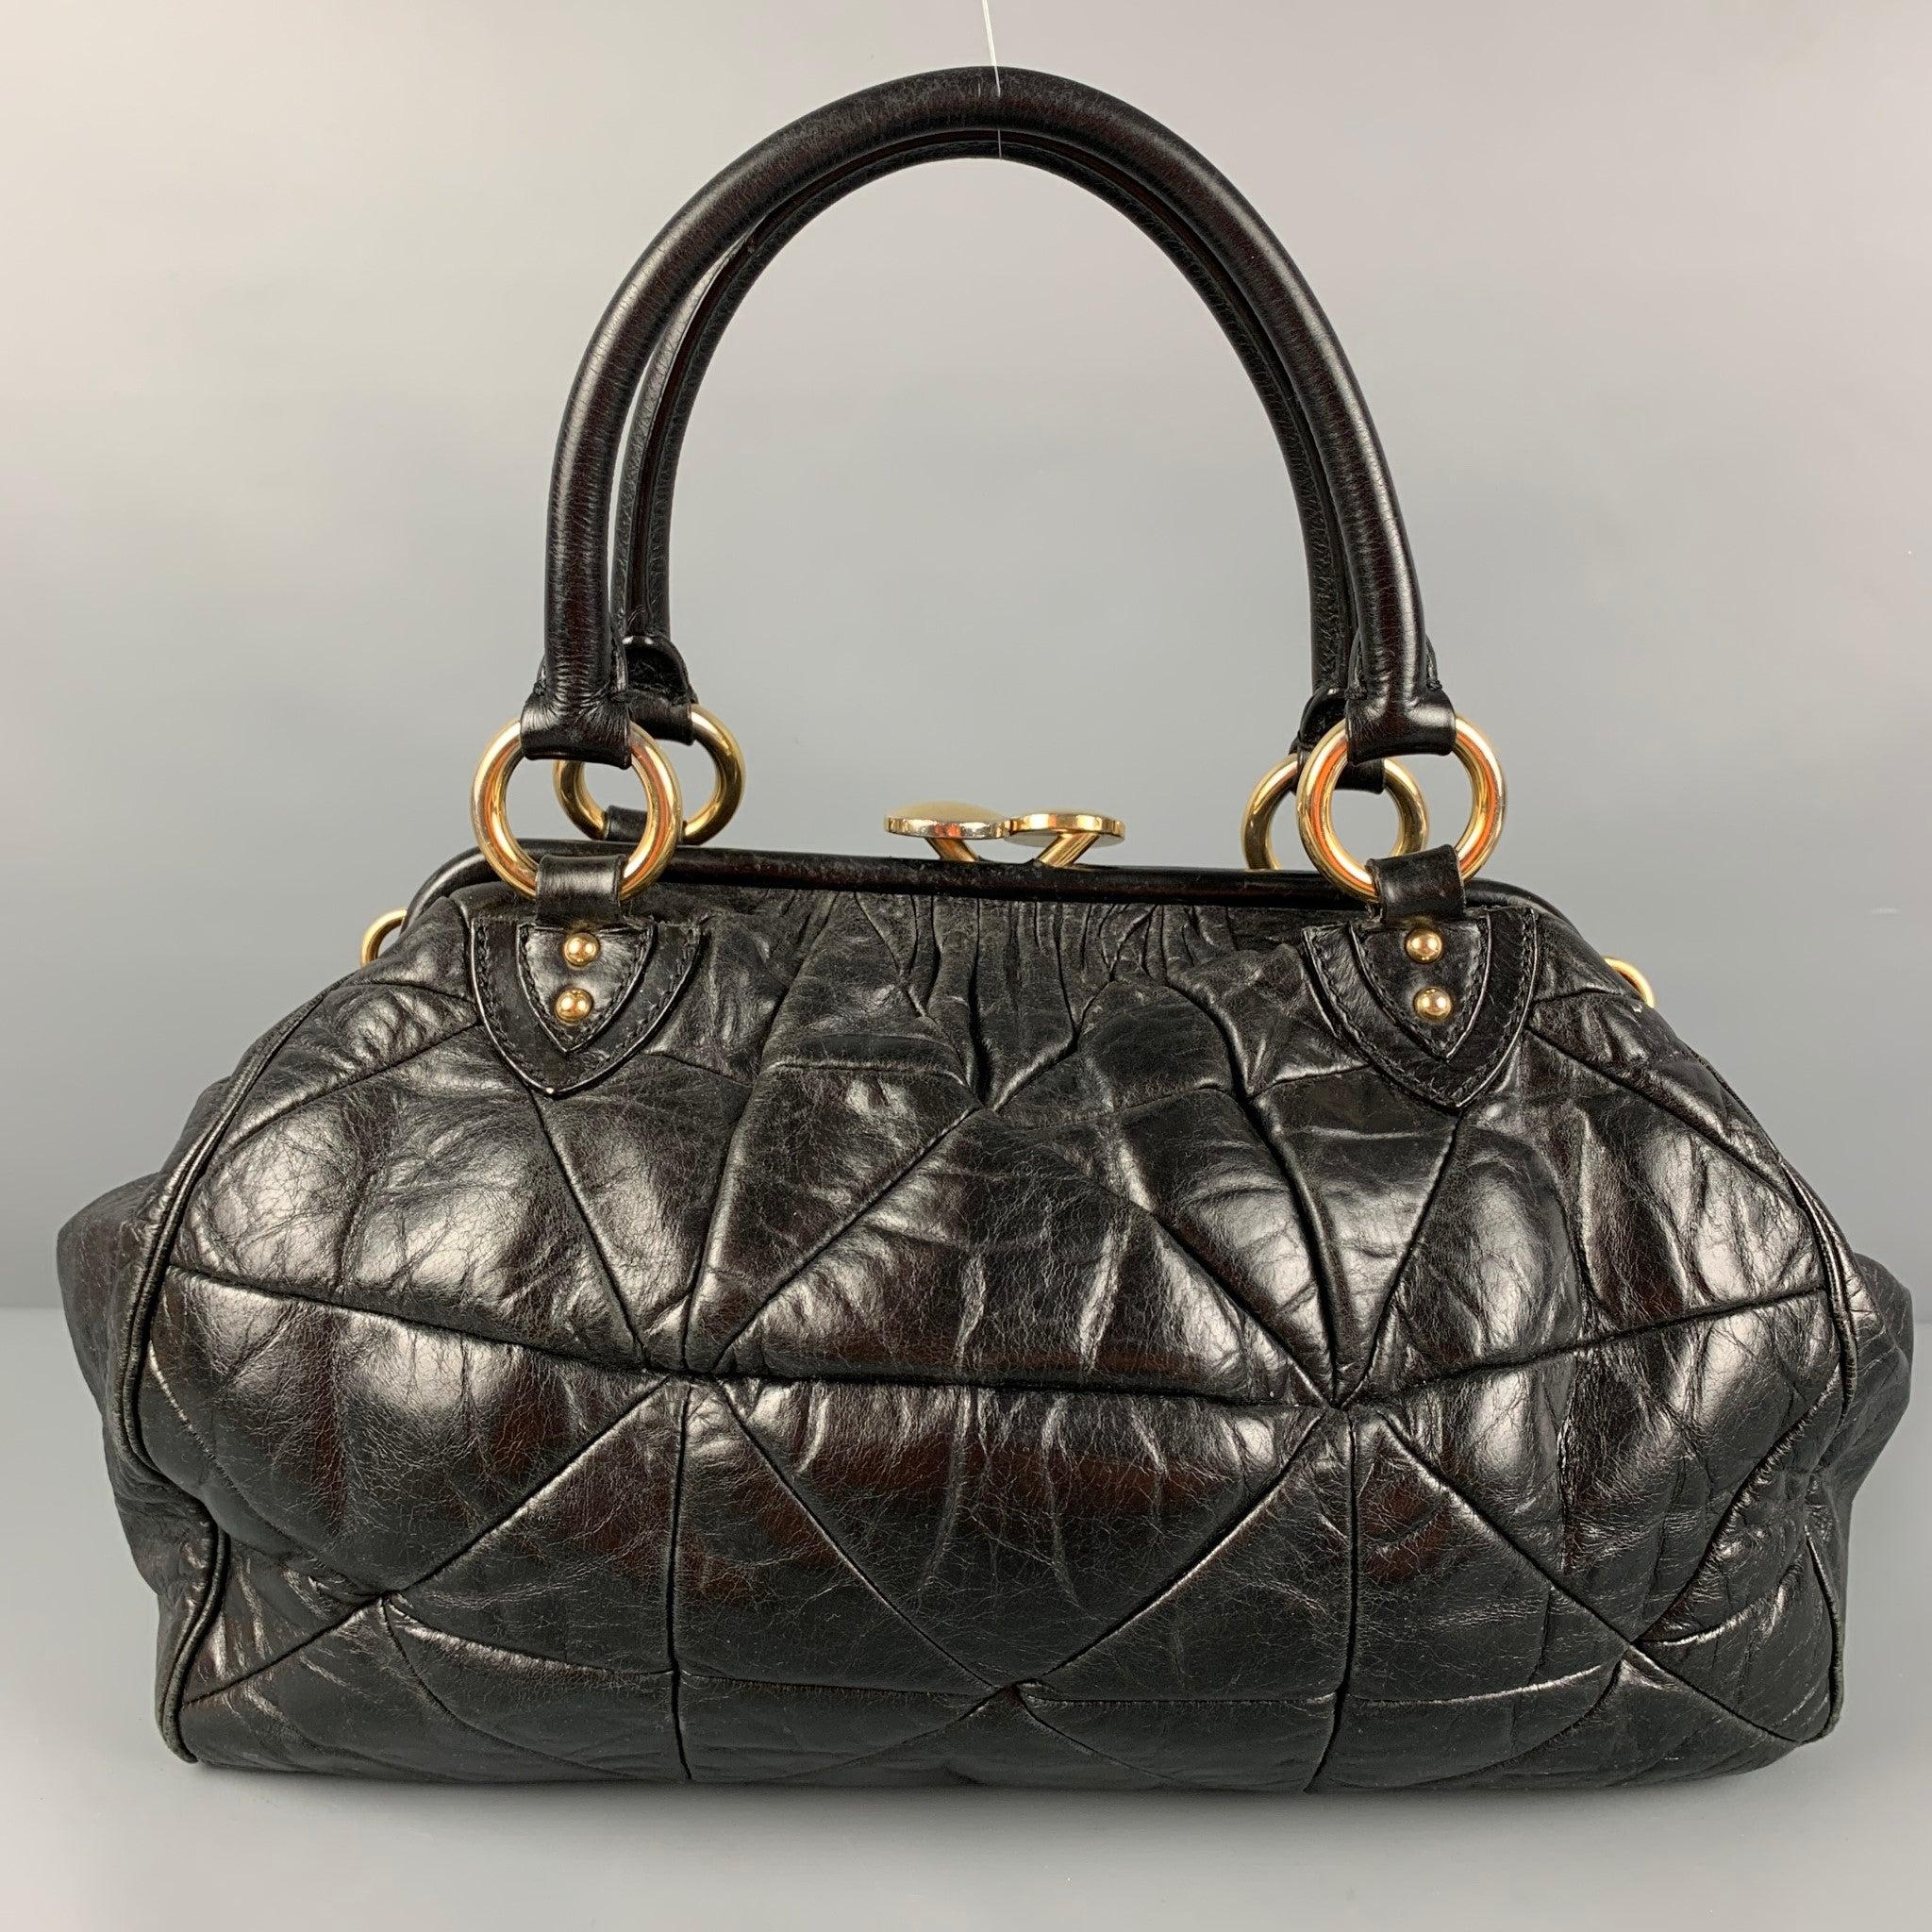 MARC JACOBS Black Quilted Leather Satchel Stam Handbag In Good Condition For Sale In San Francisco, CA